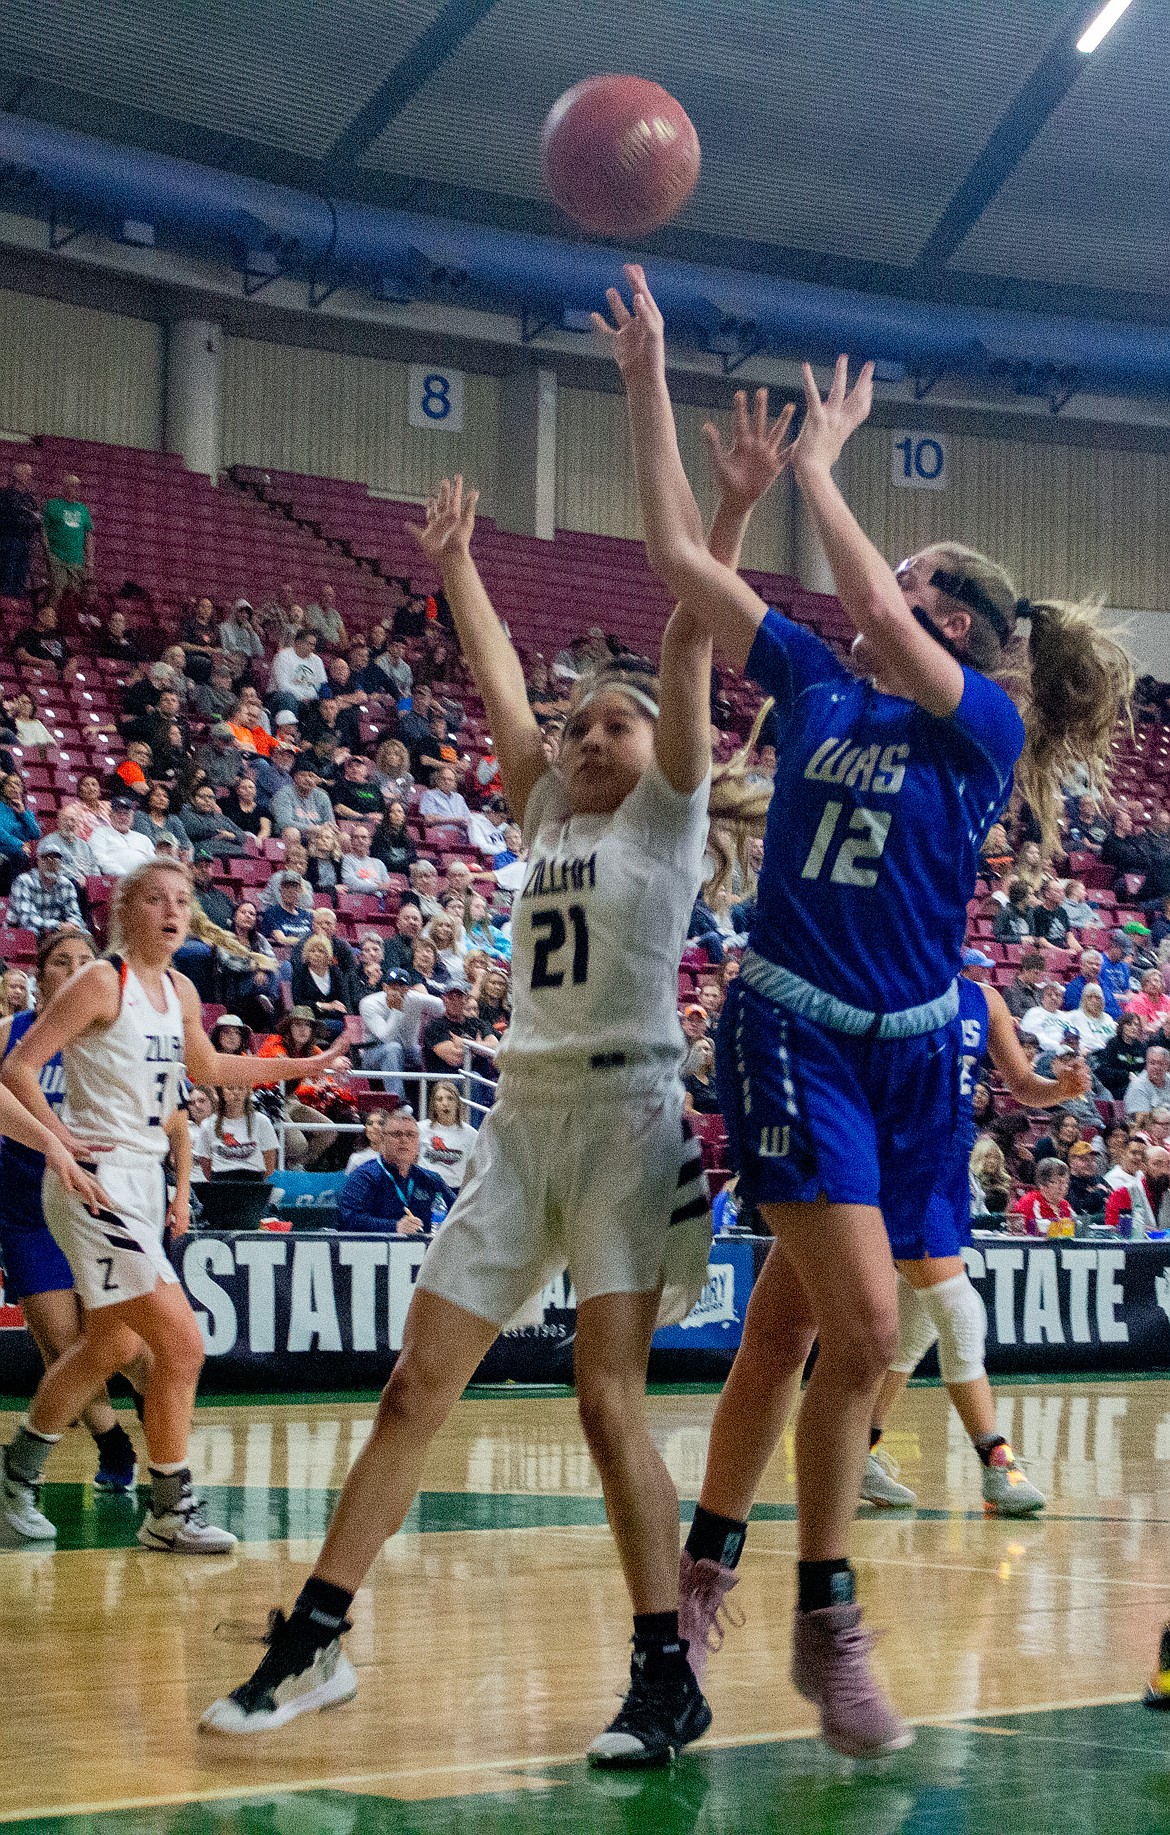 Casey McCarthy/Columbia Basin Herald Senior Brecka Erdmann turns to throw up the shot after driving into the lane against Zillah on Friday at the Yakima Valley SunDome.